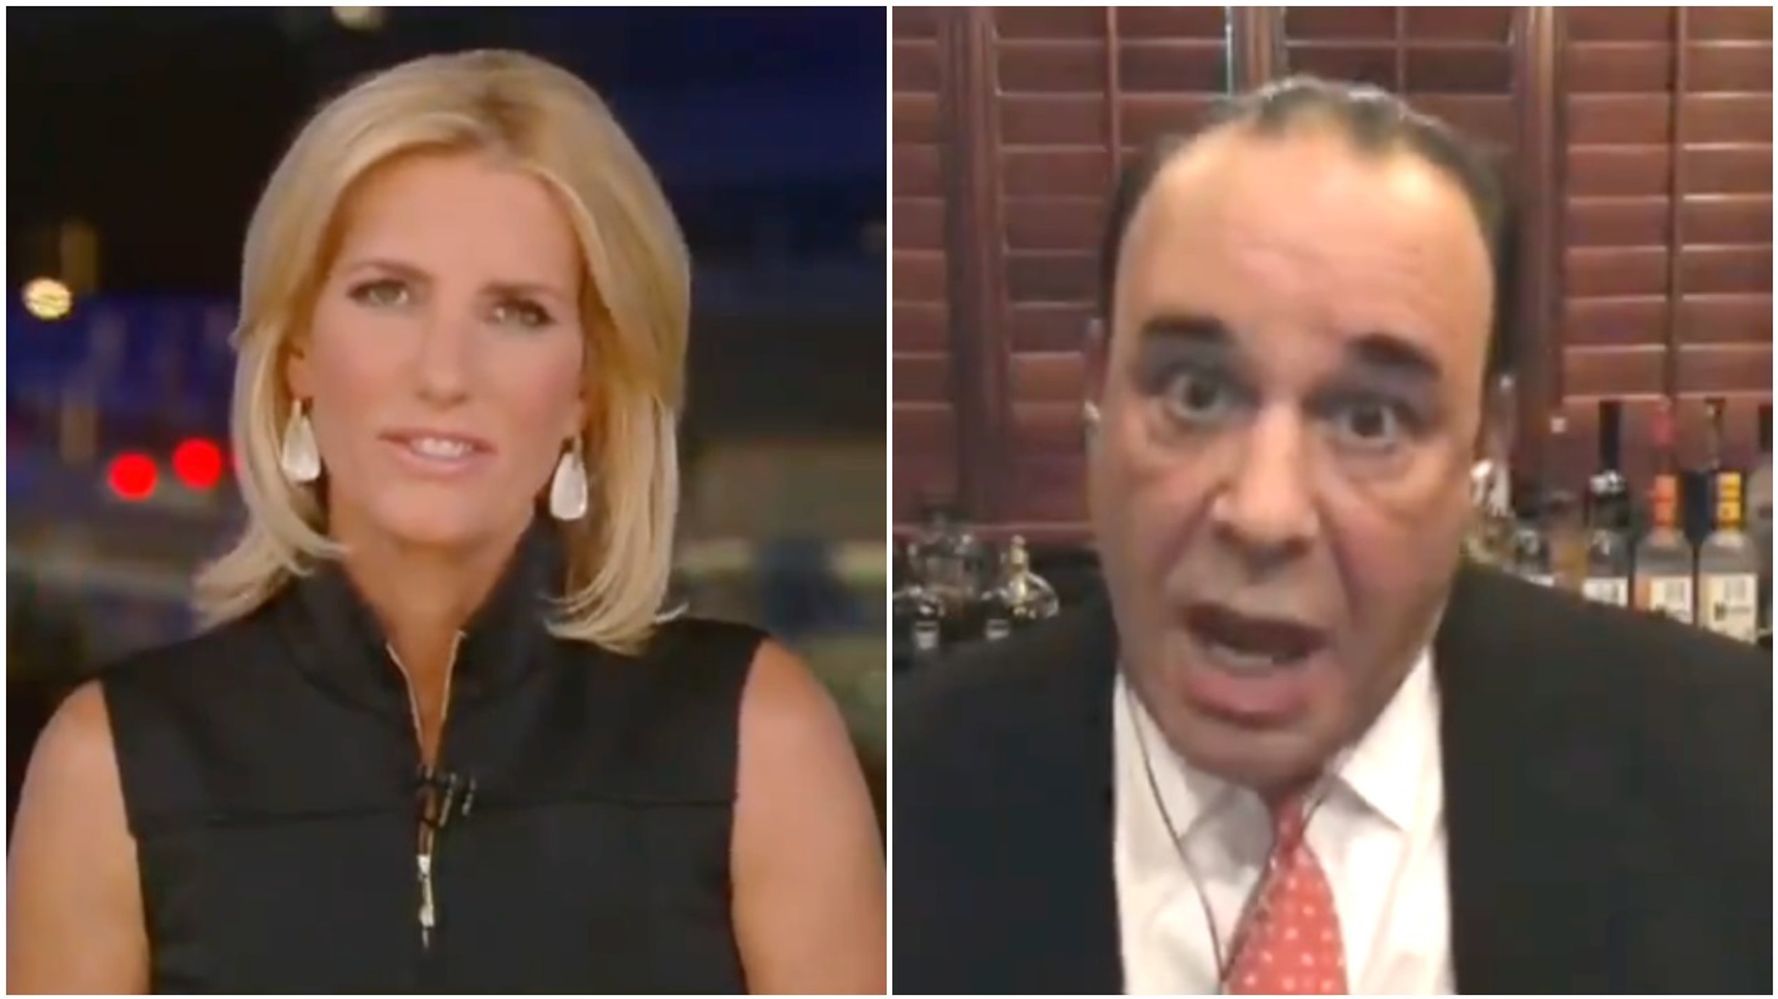 Laura Ingraham And Jon Taffer Suggest Treating Workers Like Hungry Dogs